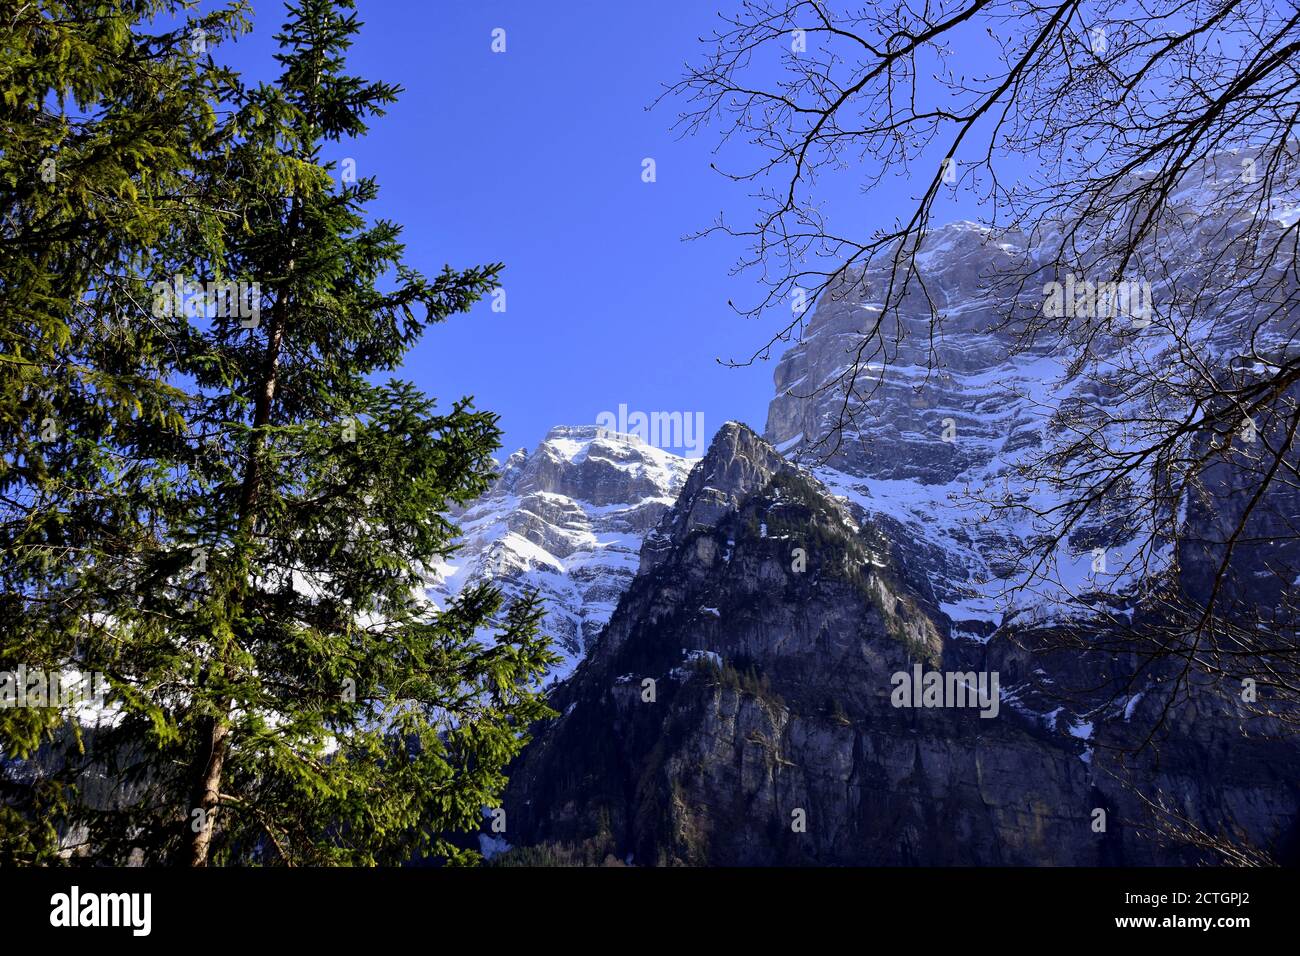 Panorama of Alps covered with snow behind the branches of trees close to Klöntalersee lake in Klöntal, Kloental valley, during sunny spring day, Stock Photo